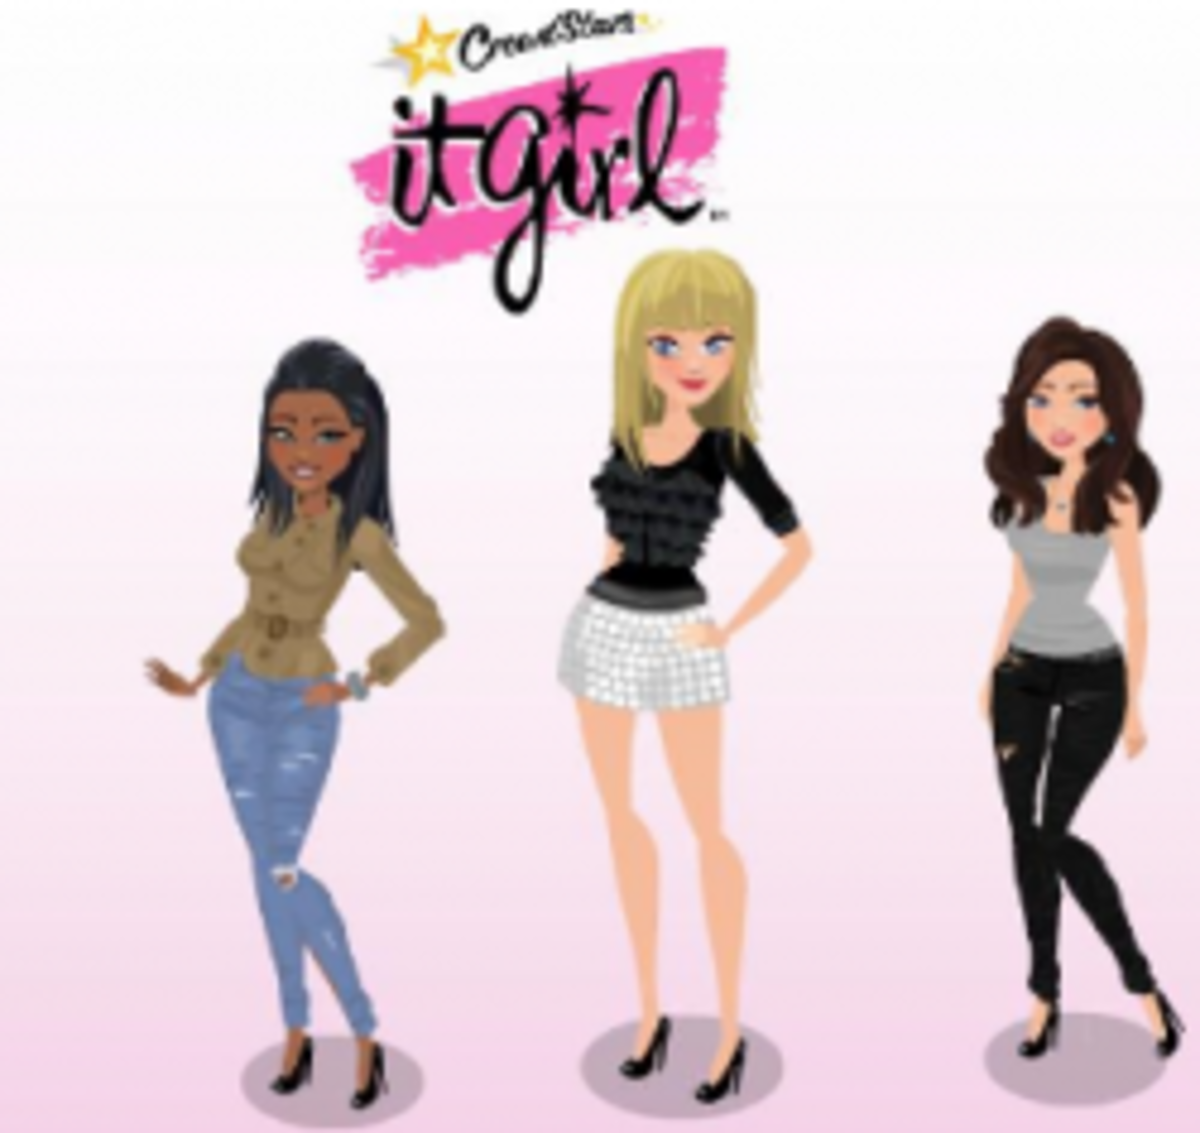 9 Games Like It Girl - Fashion and Dress-Up Games For Girls